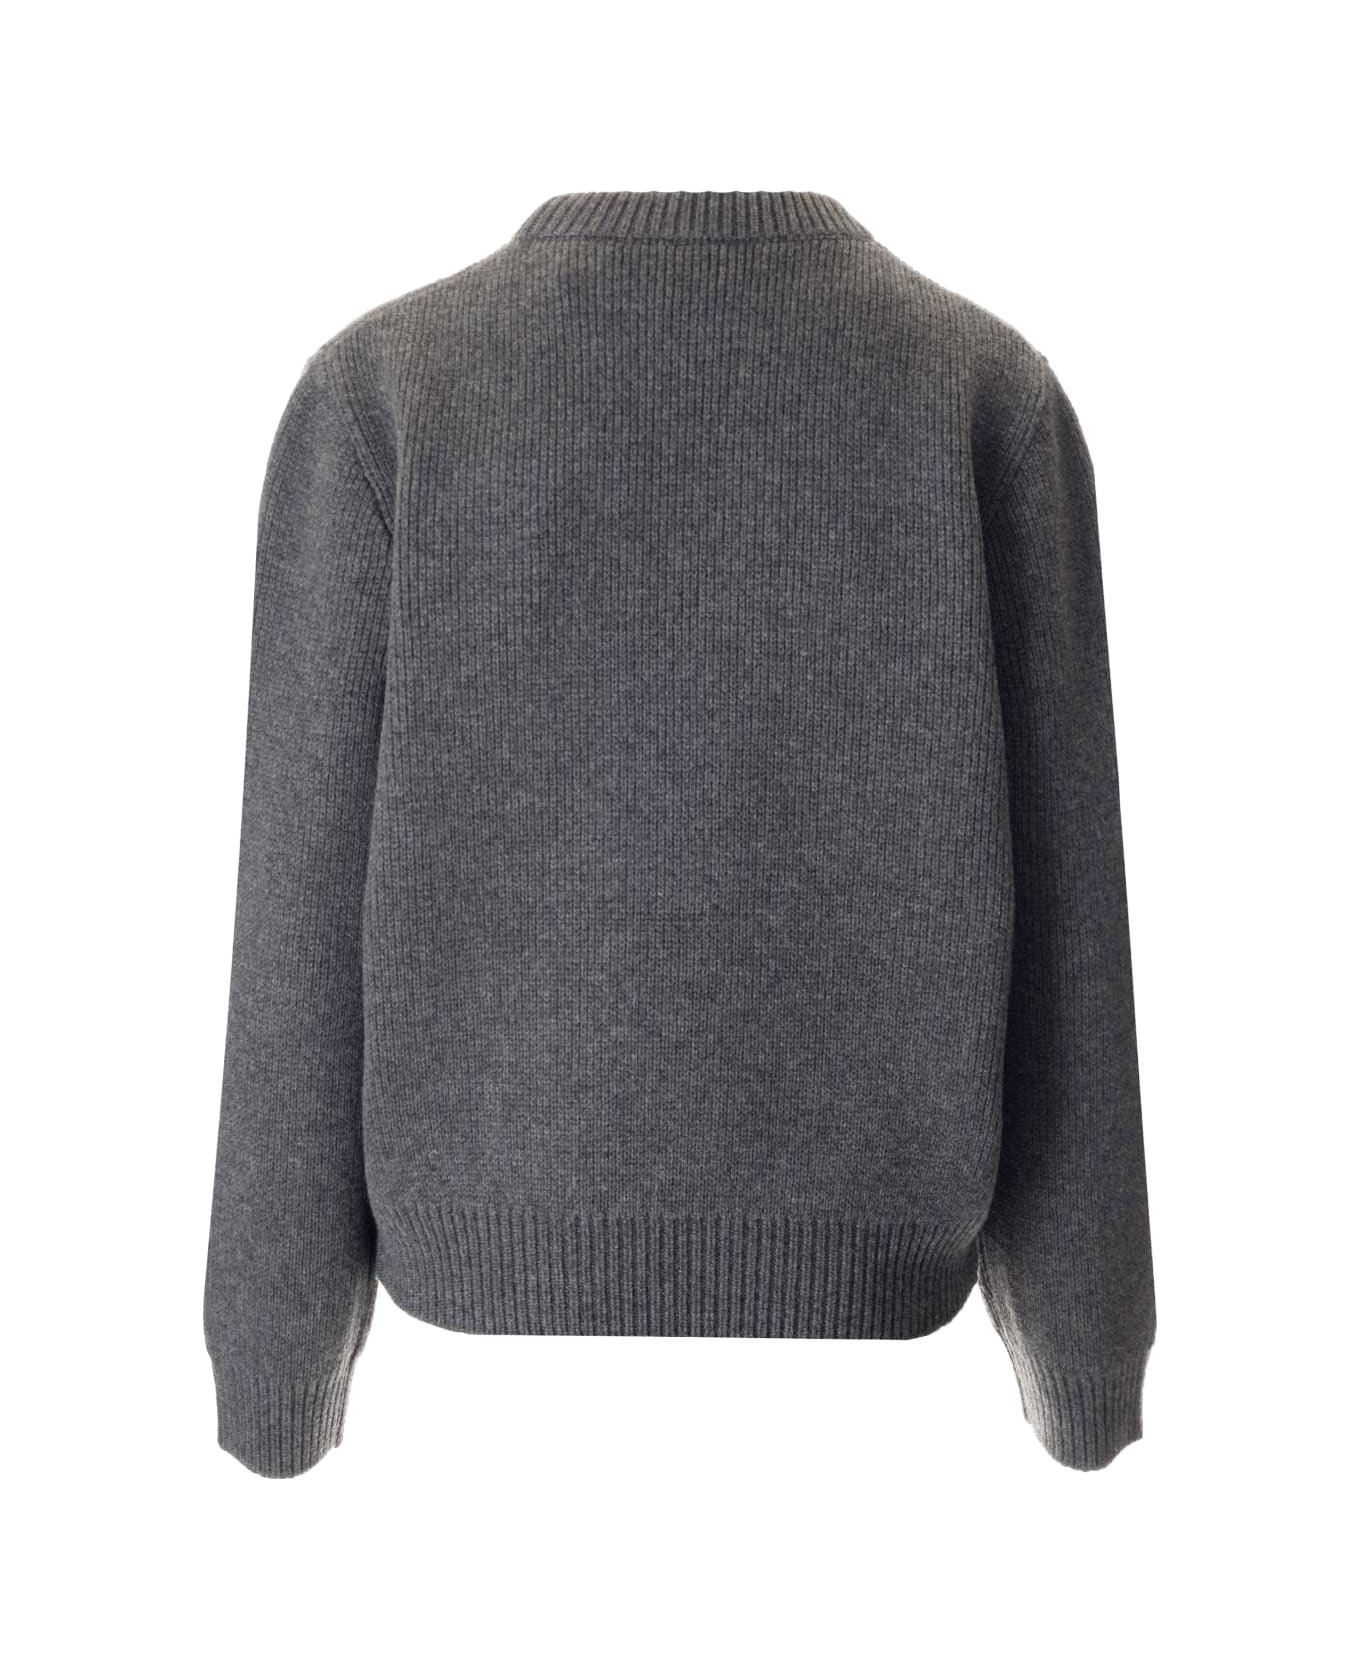 Burberry Wool And Cashmere Pullover - Grey ニットウェア